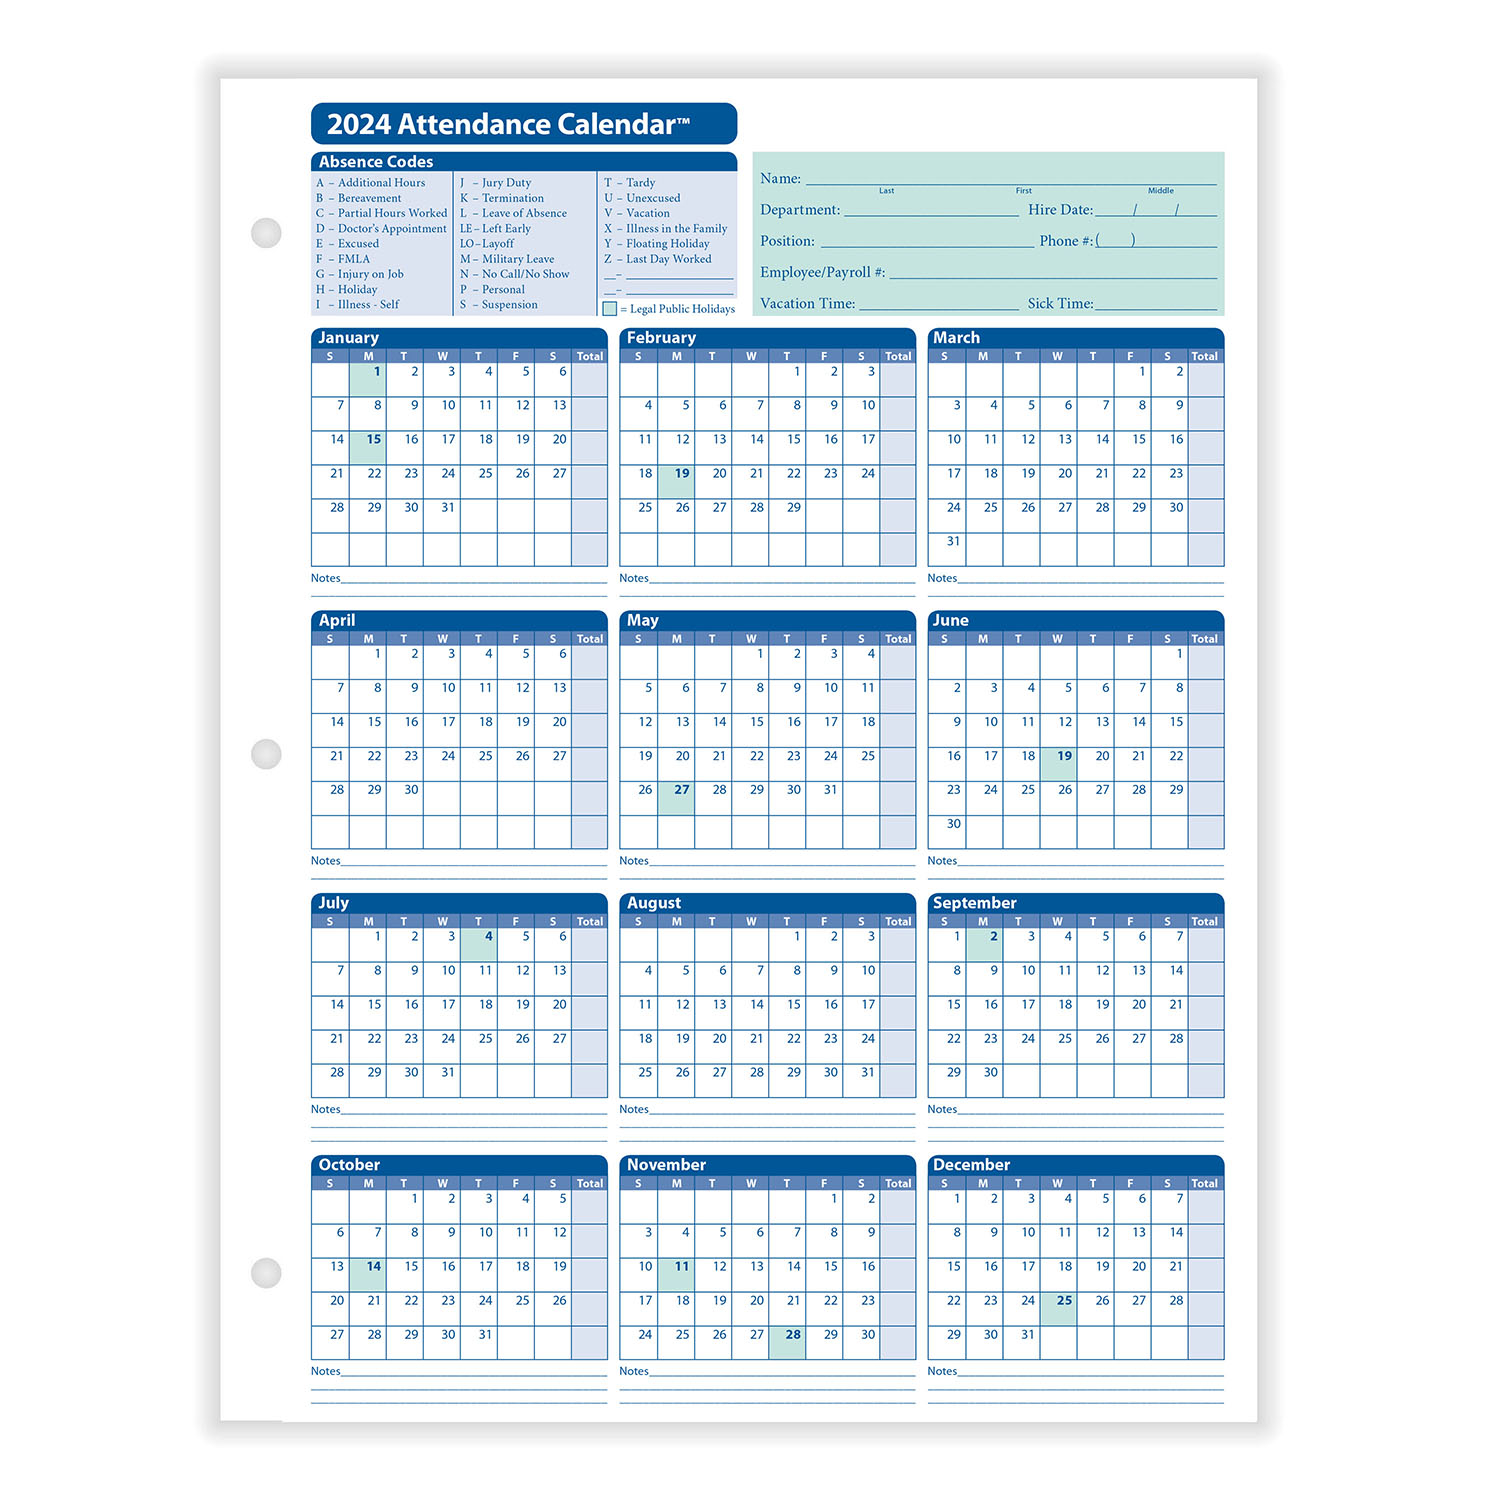 2024 Yearly Employee Attendance Calendar | Yearly Calendar | Hrdirect throughout Employee Attendance Calendar 2024 Printable